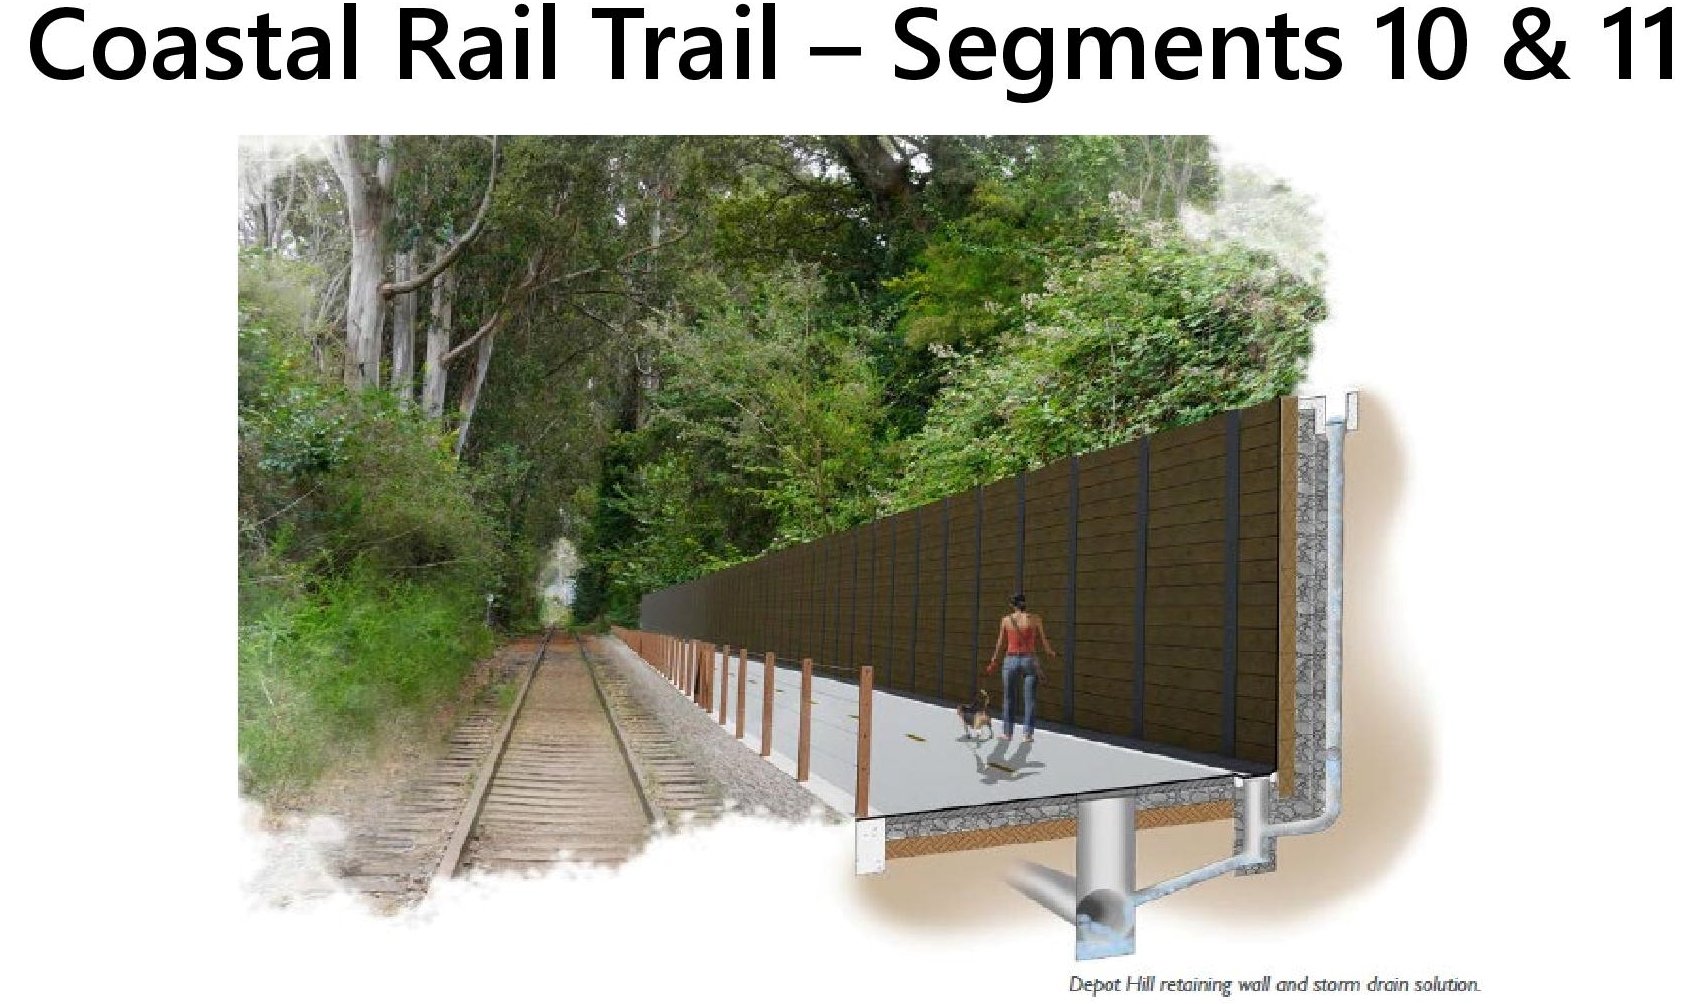 Retaining walls and drainage are planned on areas of Segment 10. (Santa Cruz County Regional Transportation Commission)